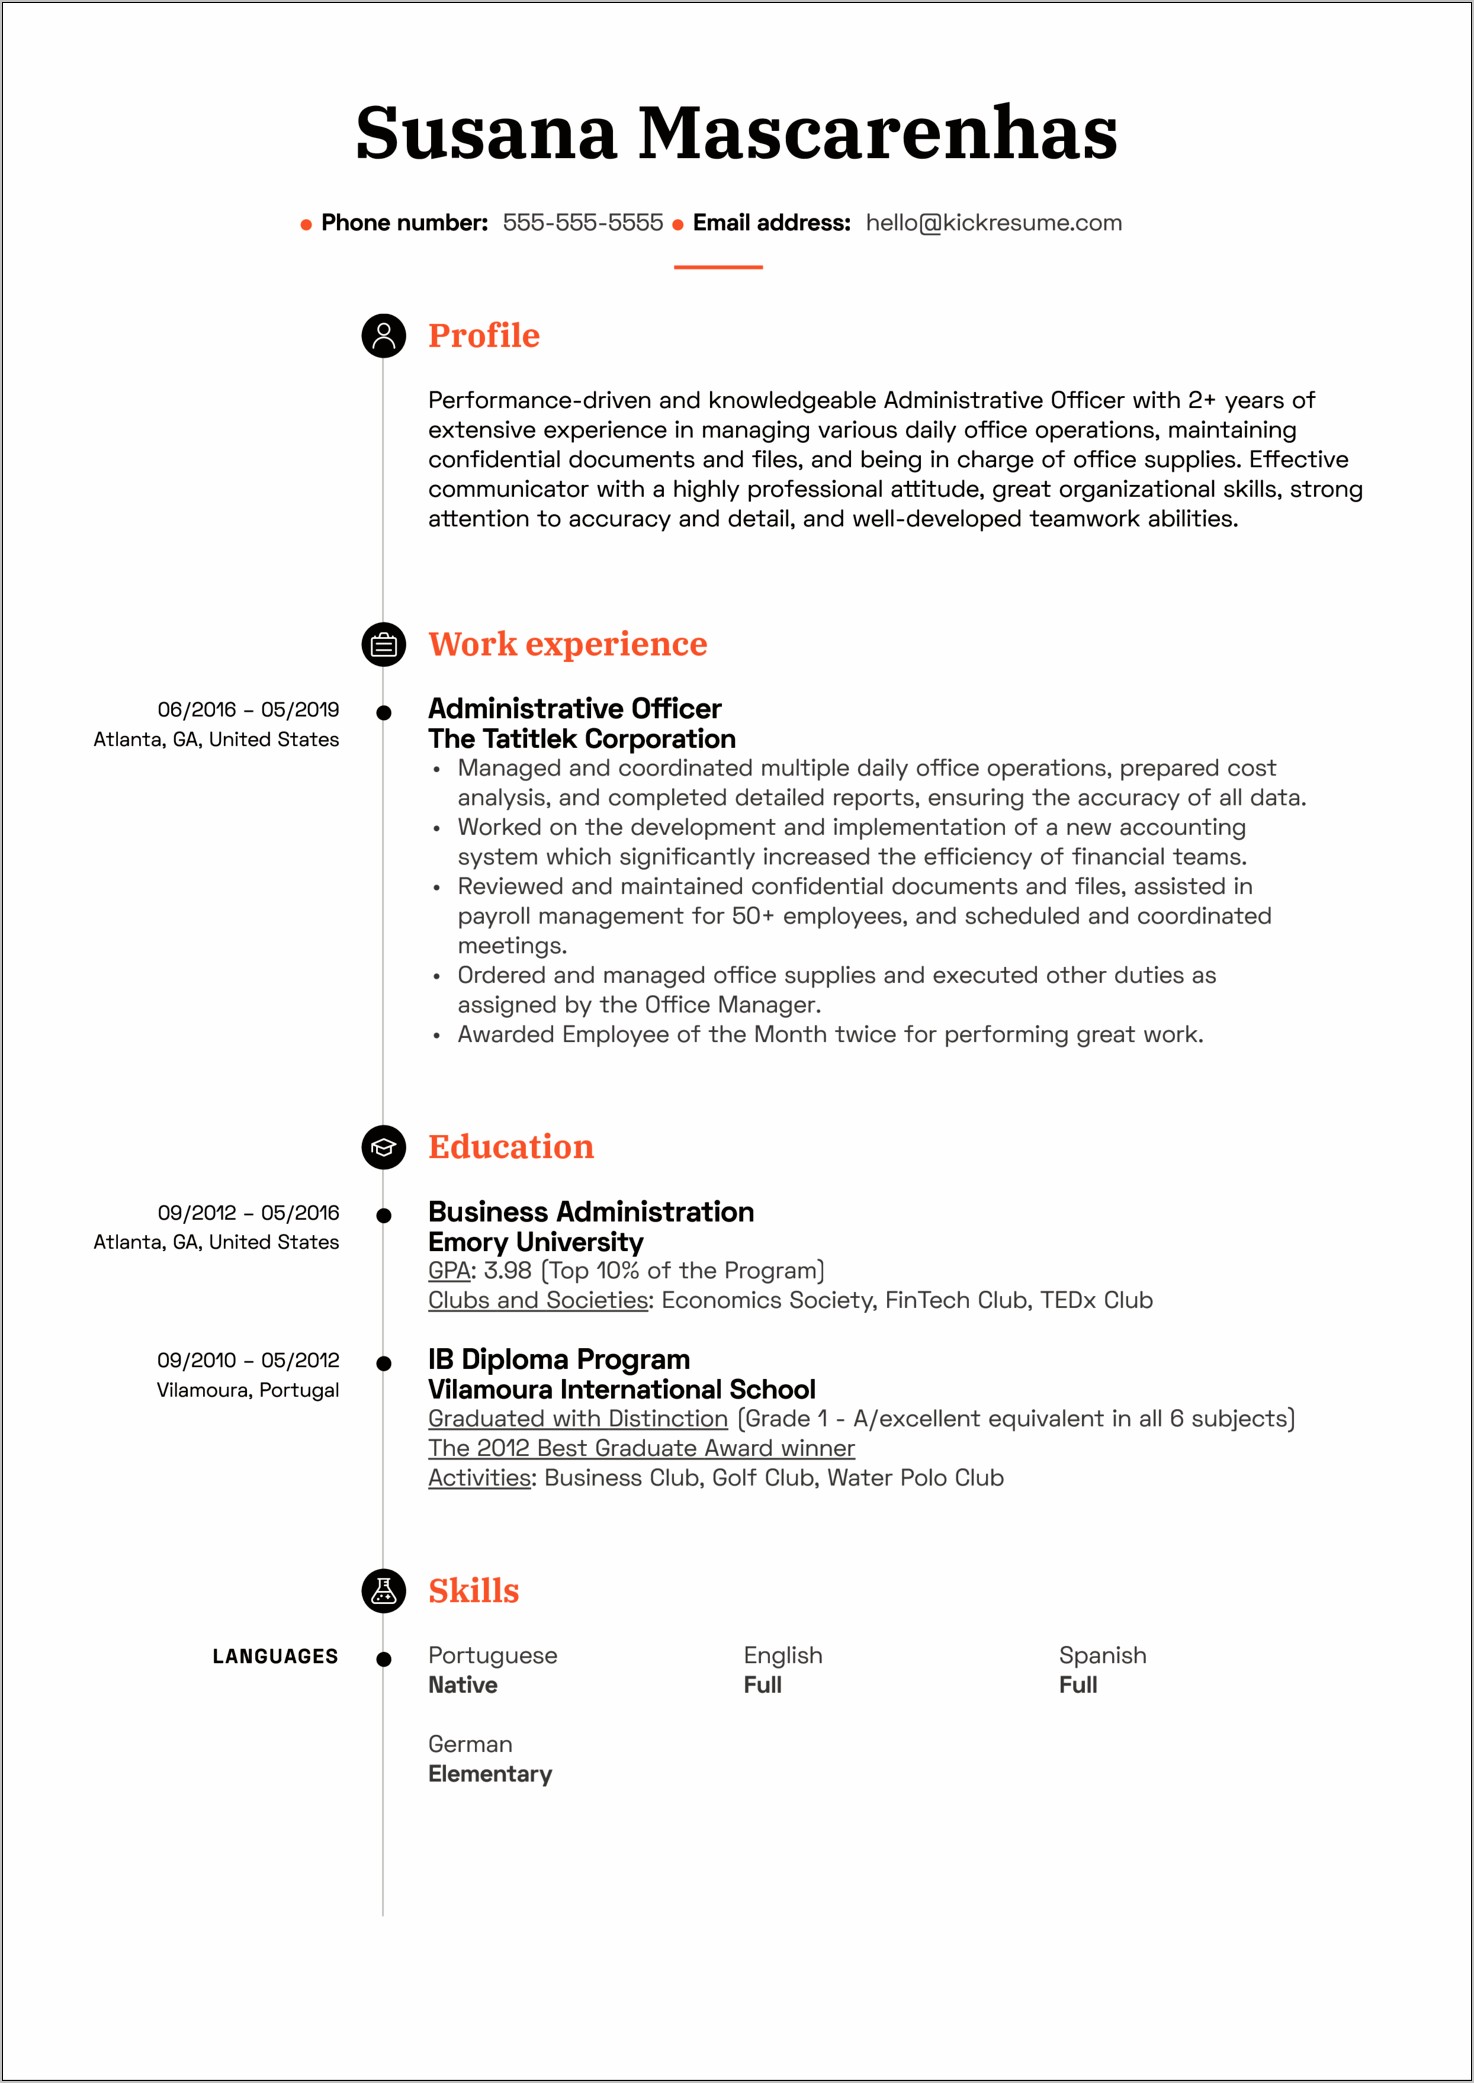 Resume Format For Administration Job In School